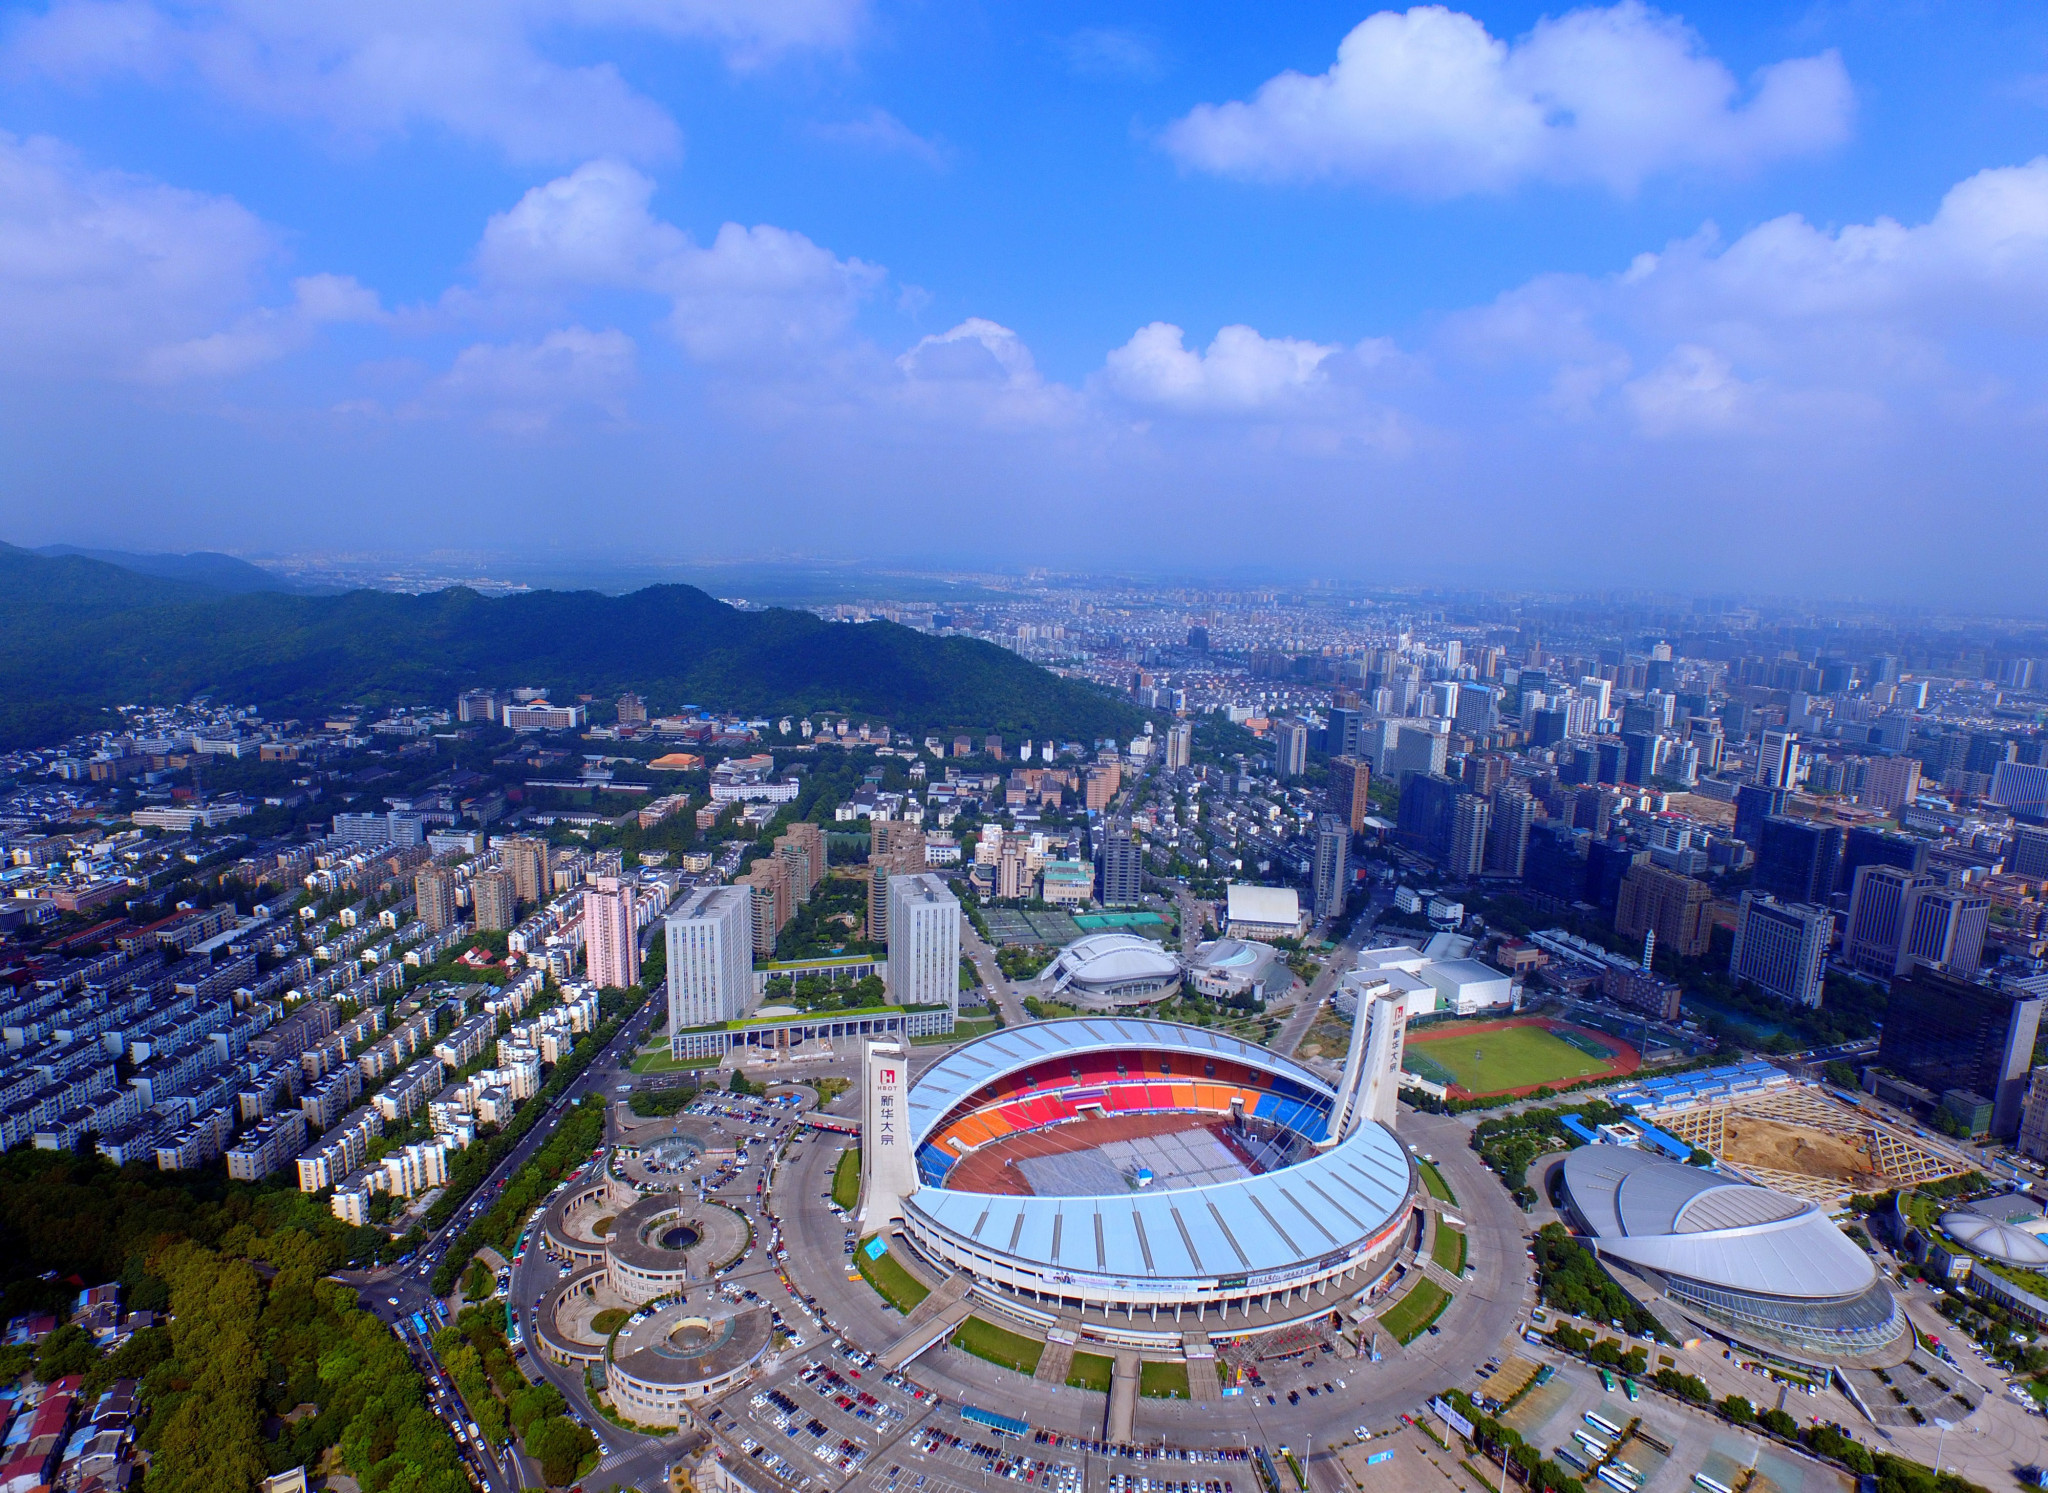 Hangzhou in China is set to play host to the 19th edition of the Asian Games in 2022 ©Getty Images